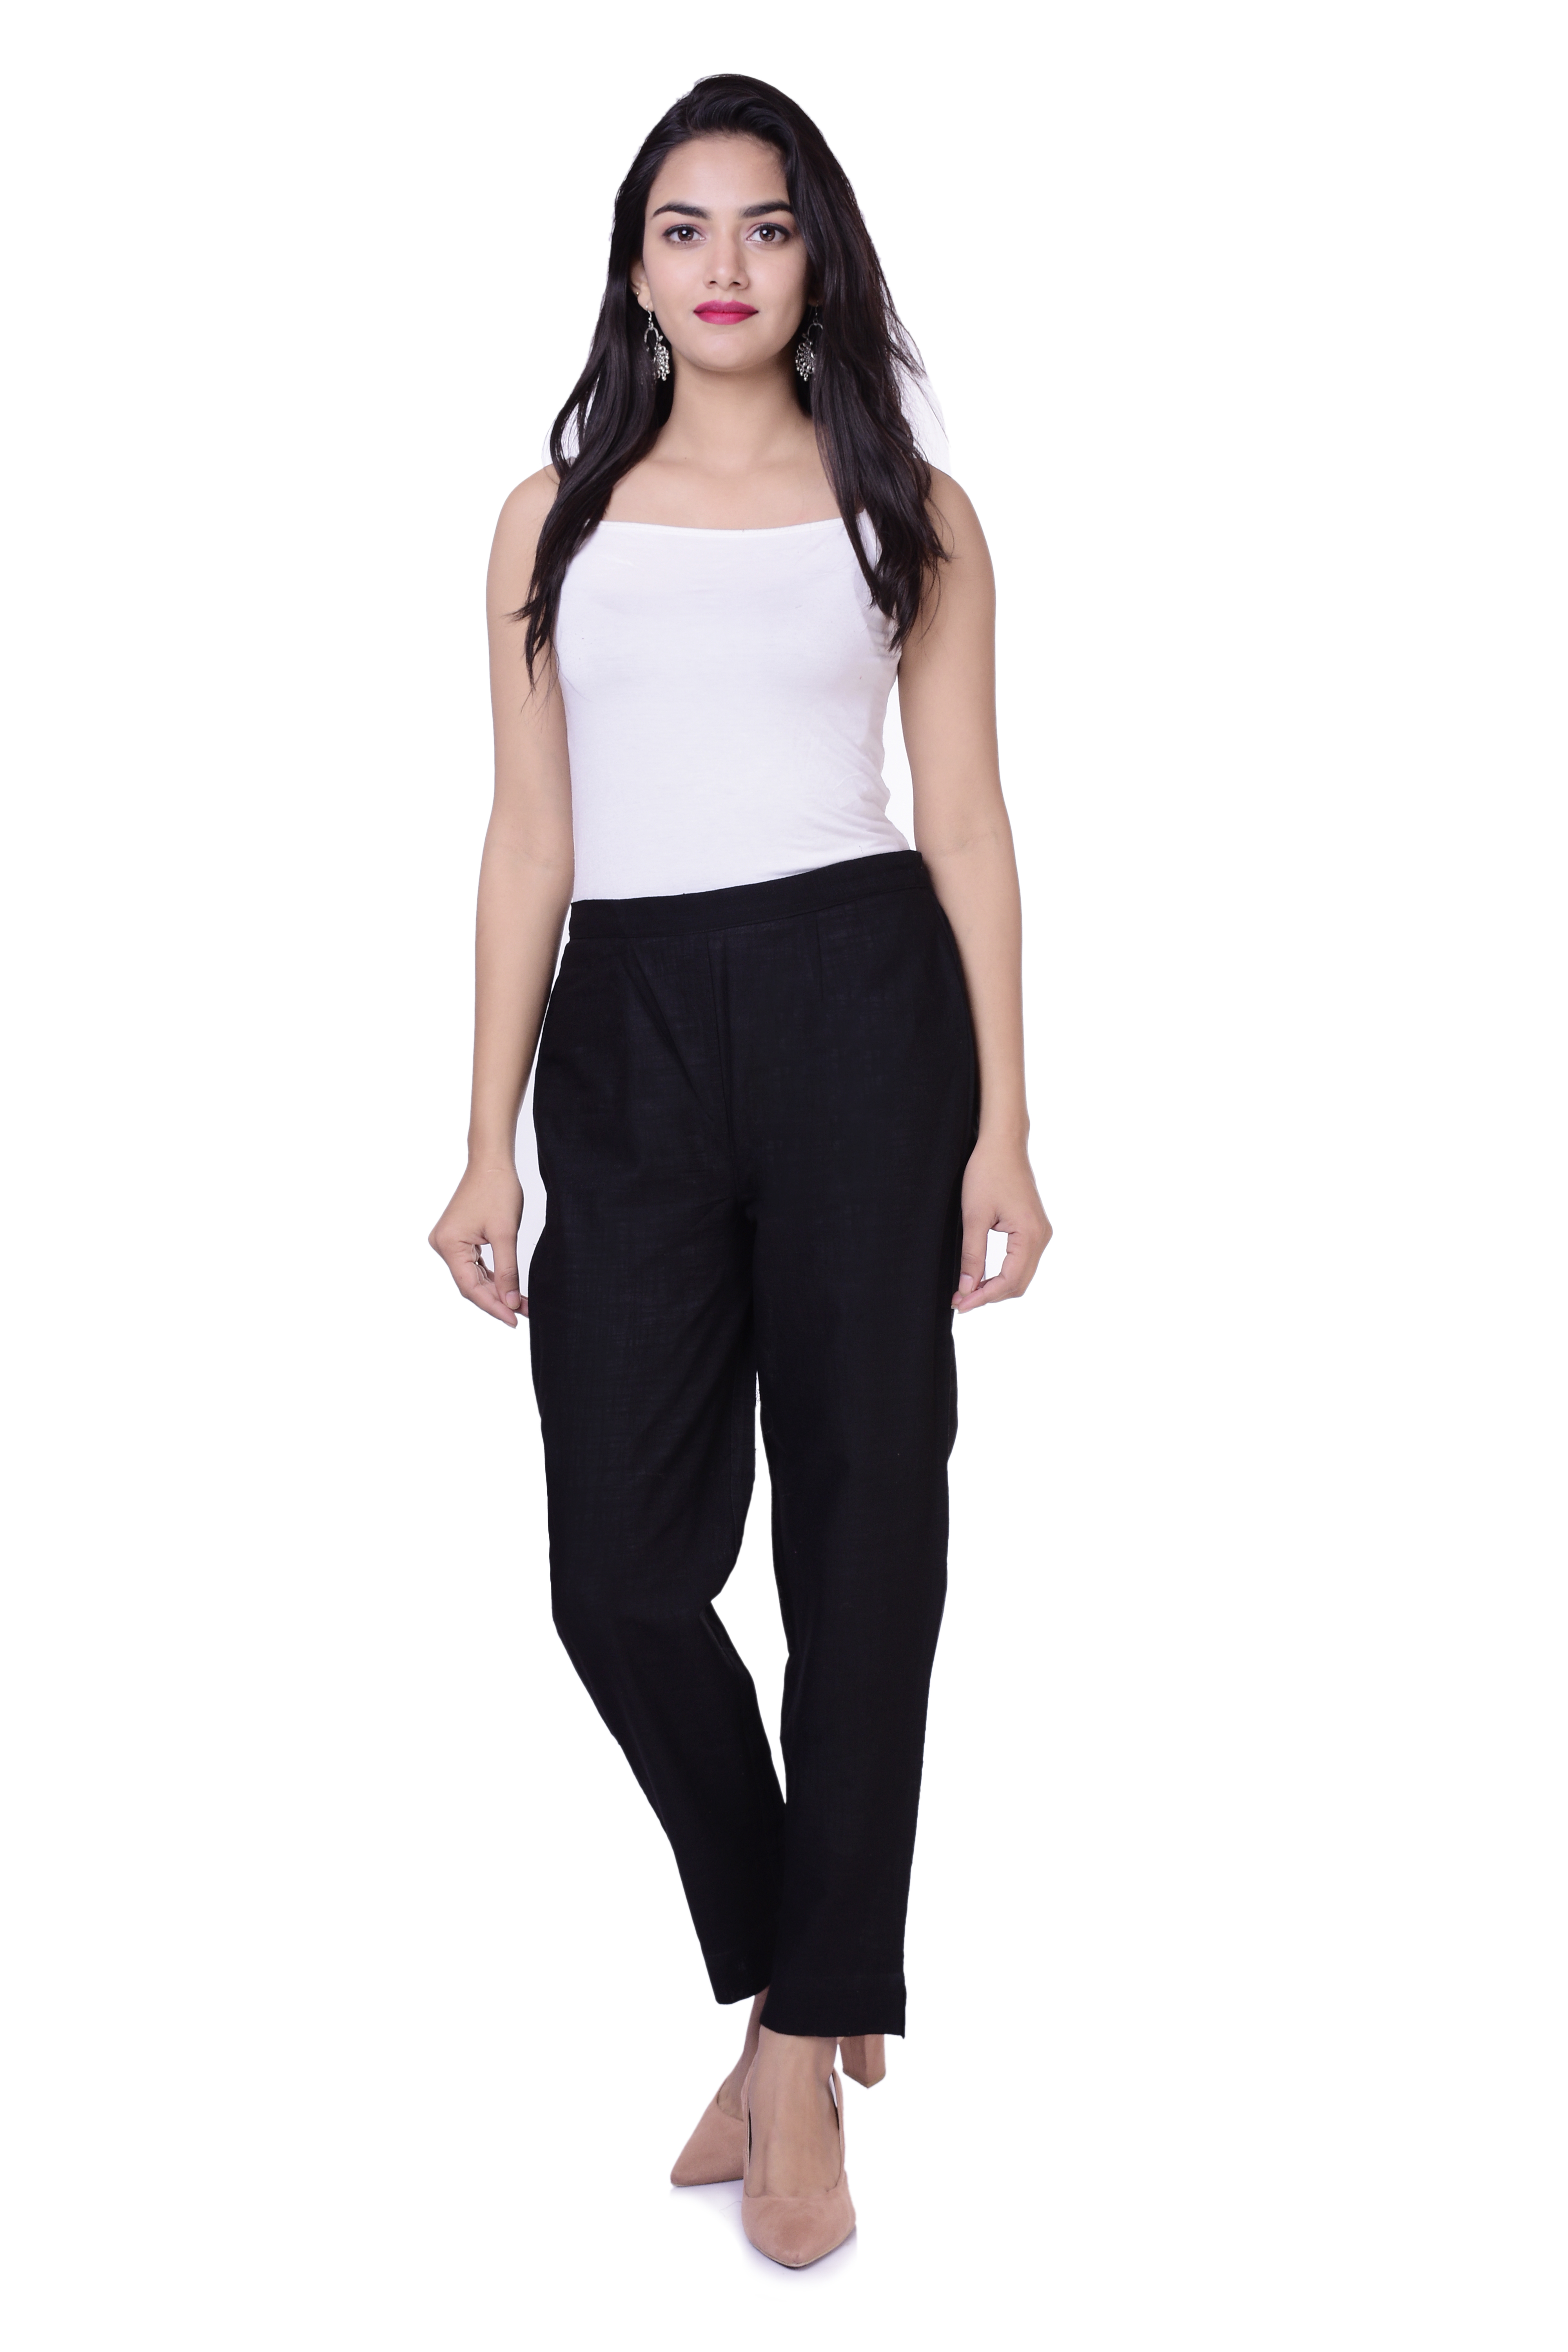 Rock Women's Skinny Pants with Lace Up